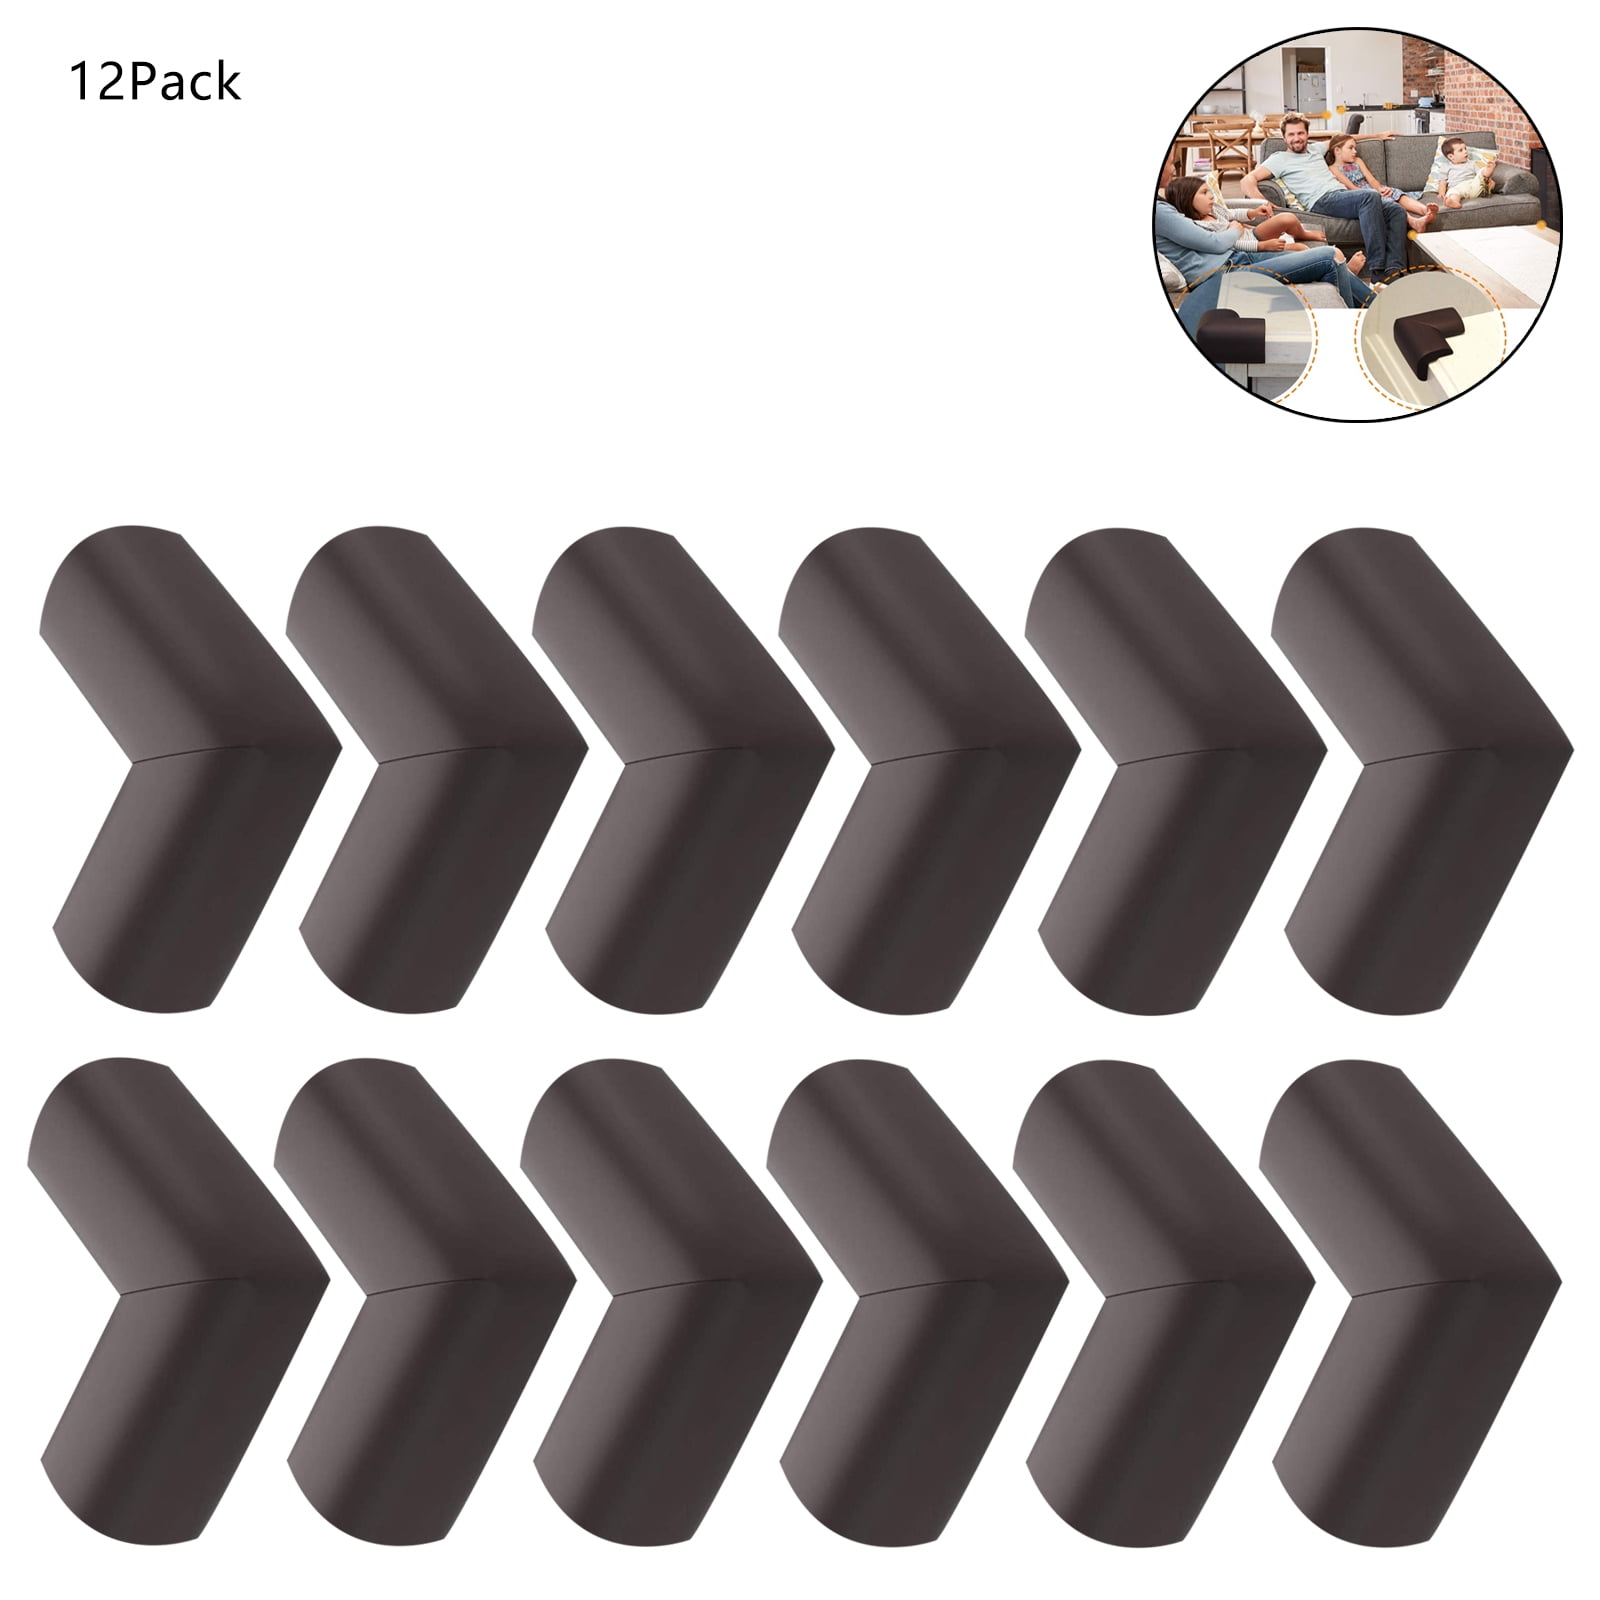 3M Tape 12 Pack Corner Protector Baby proofing corner guards baby safety edge protectors for furniture table desk fireplace bumpers for babies Black 